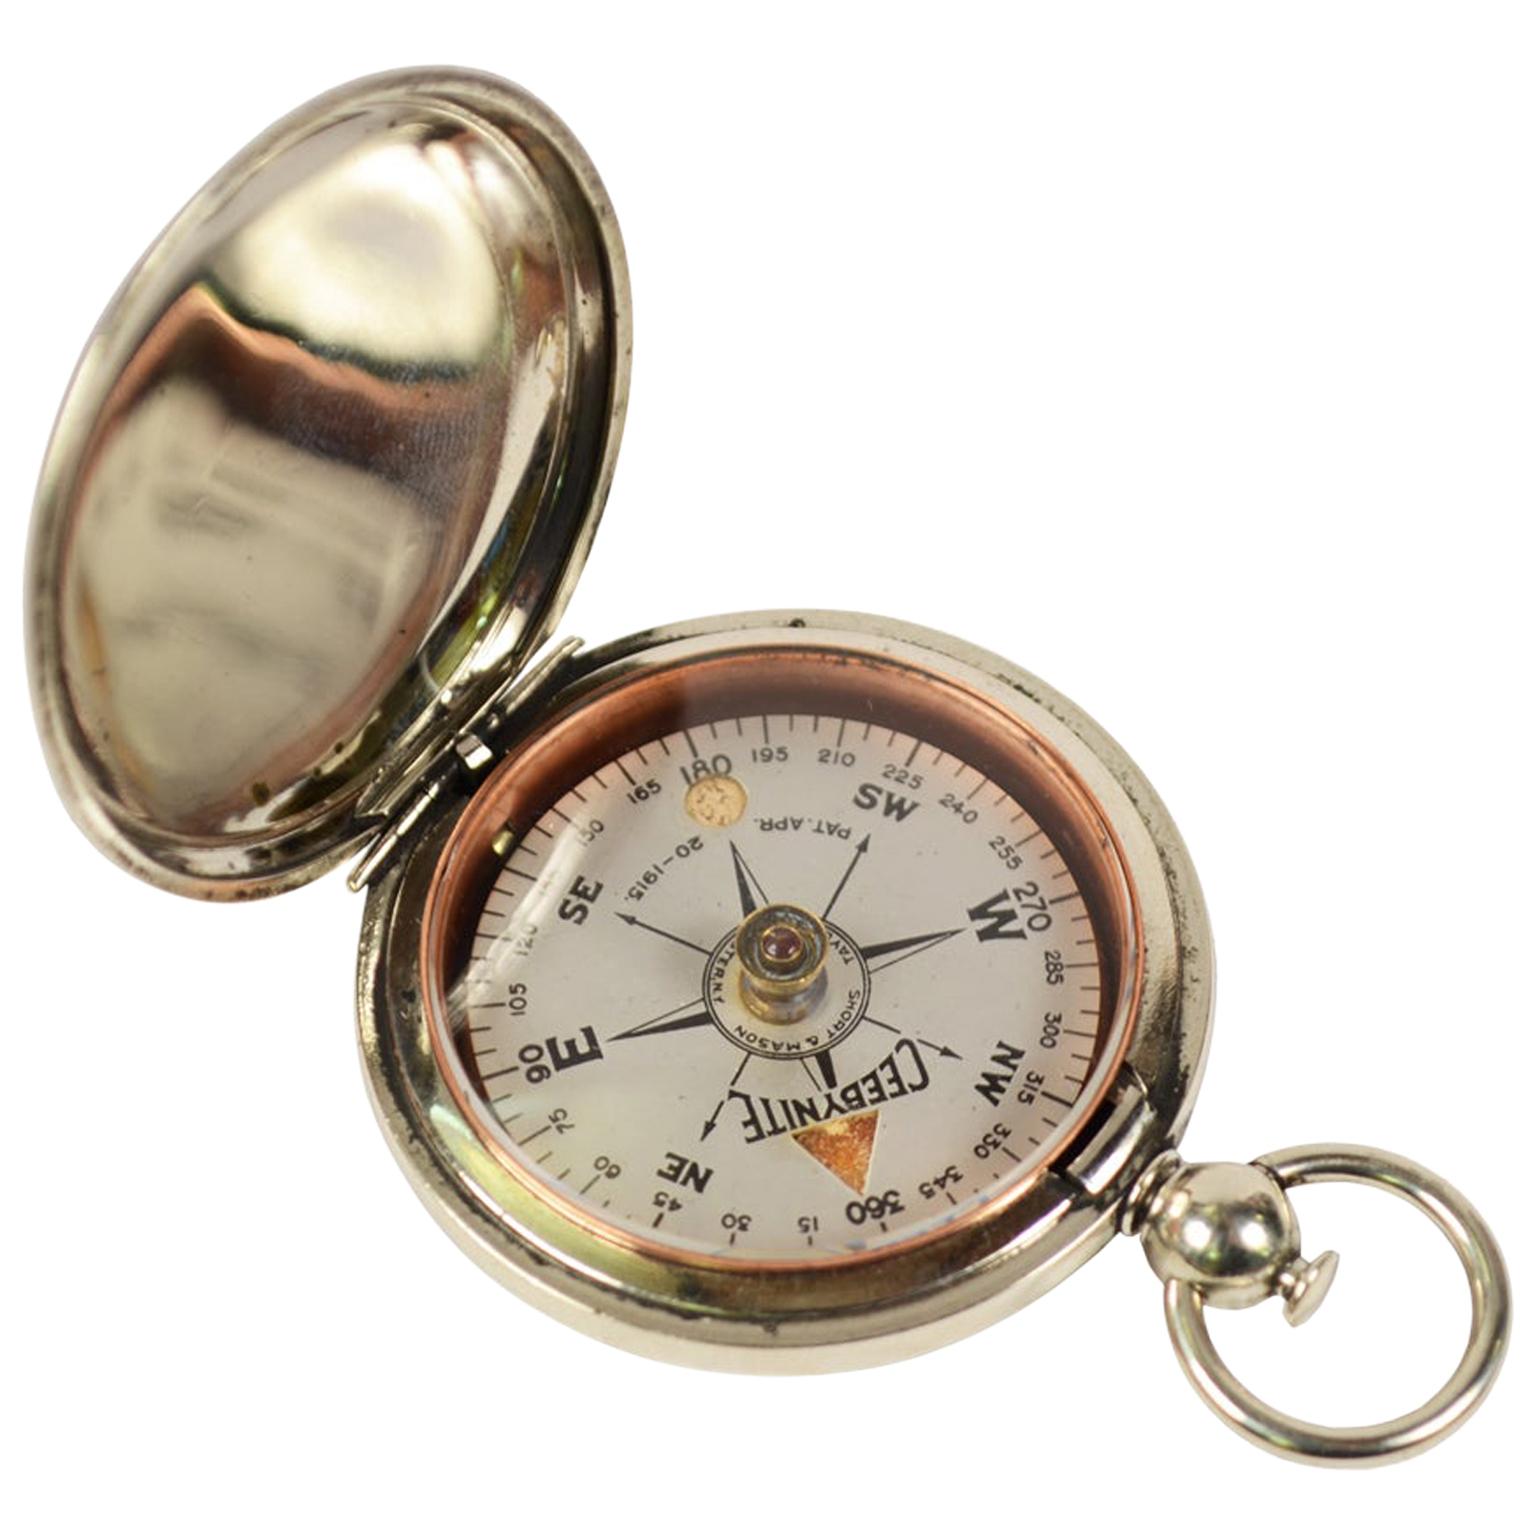 Brass Pocket Compass Used by American Aviation Officers, 1915